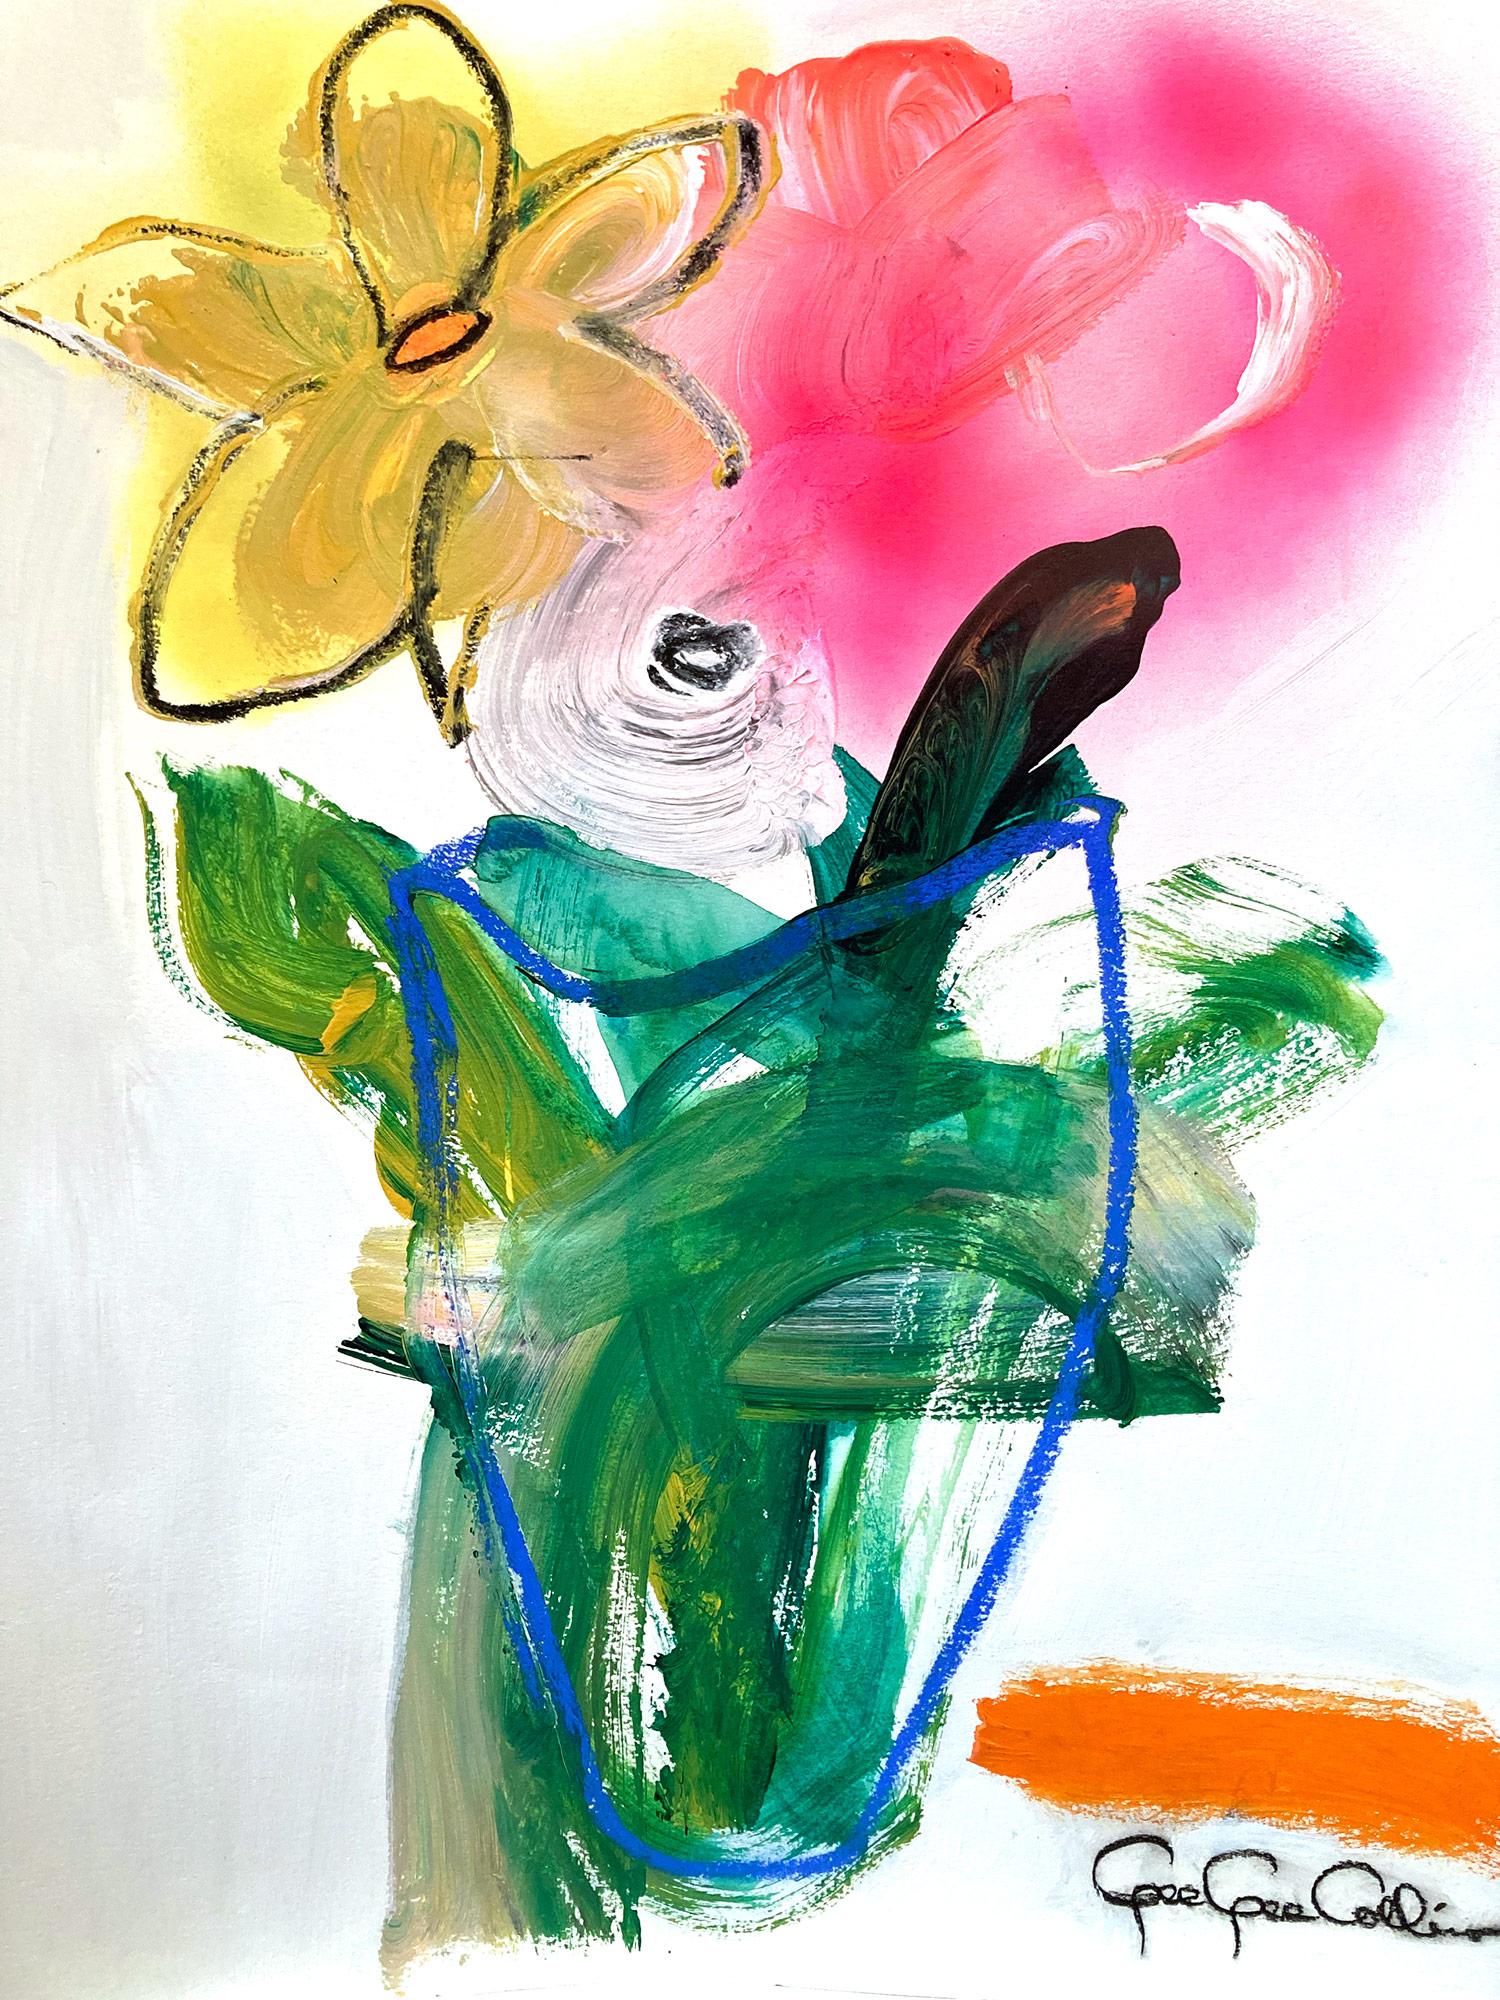 Gee Gee Collins Abstract Painting - "Yellow and Pink Florals" Colorful Abstract Still Life Painting on Paper